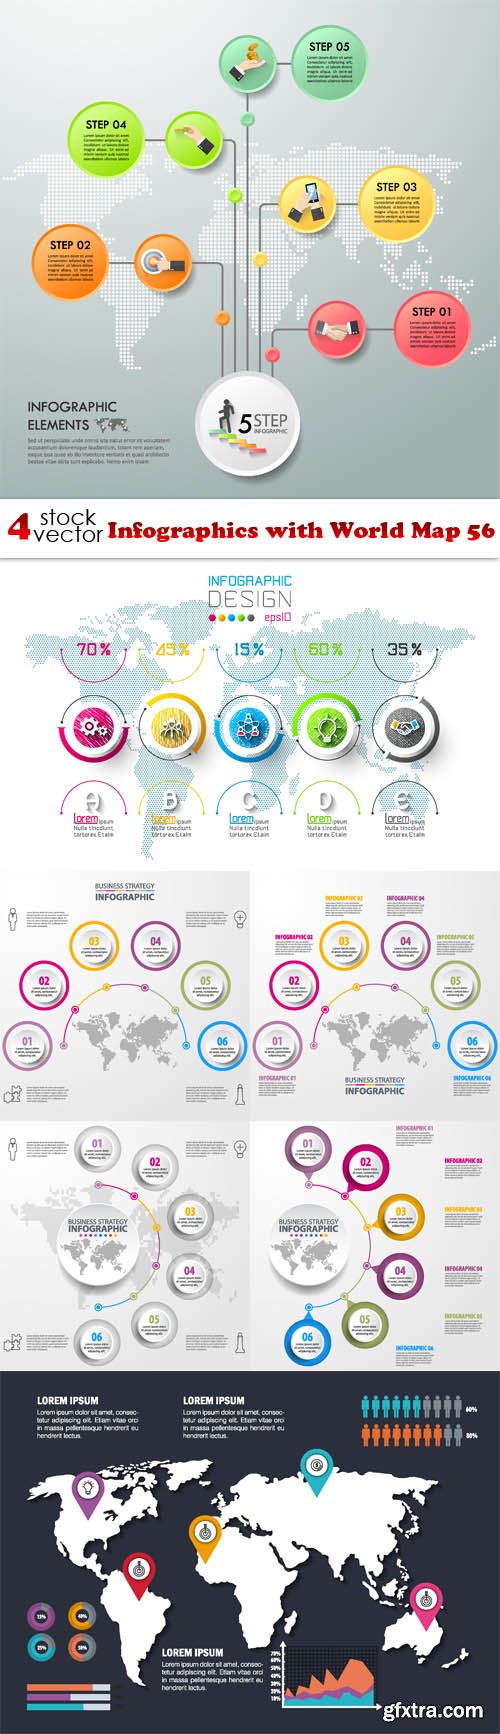 Vectors - Infographics with World Map 56